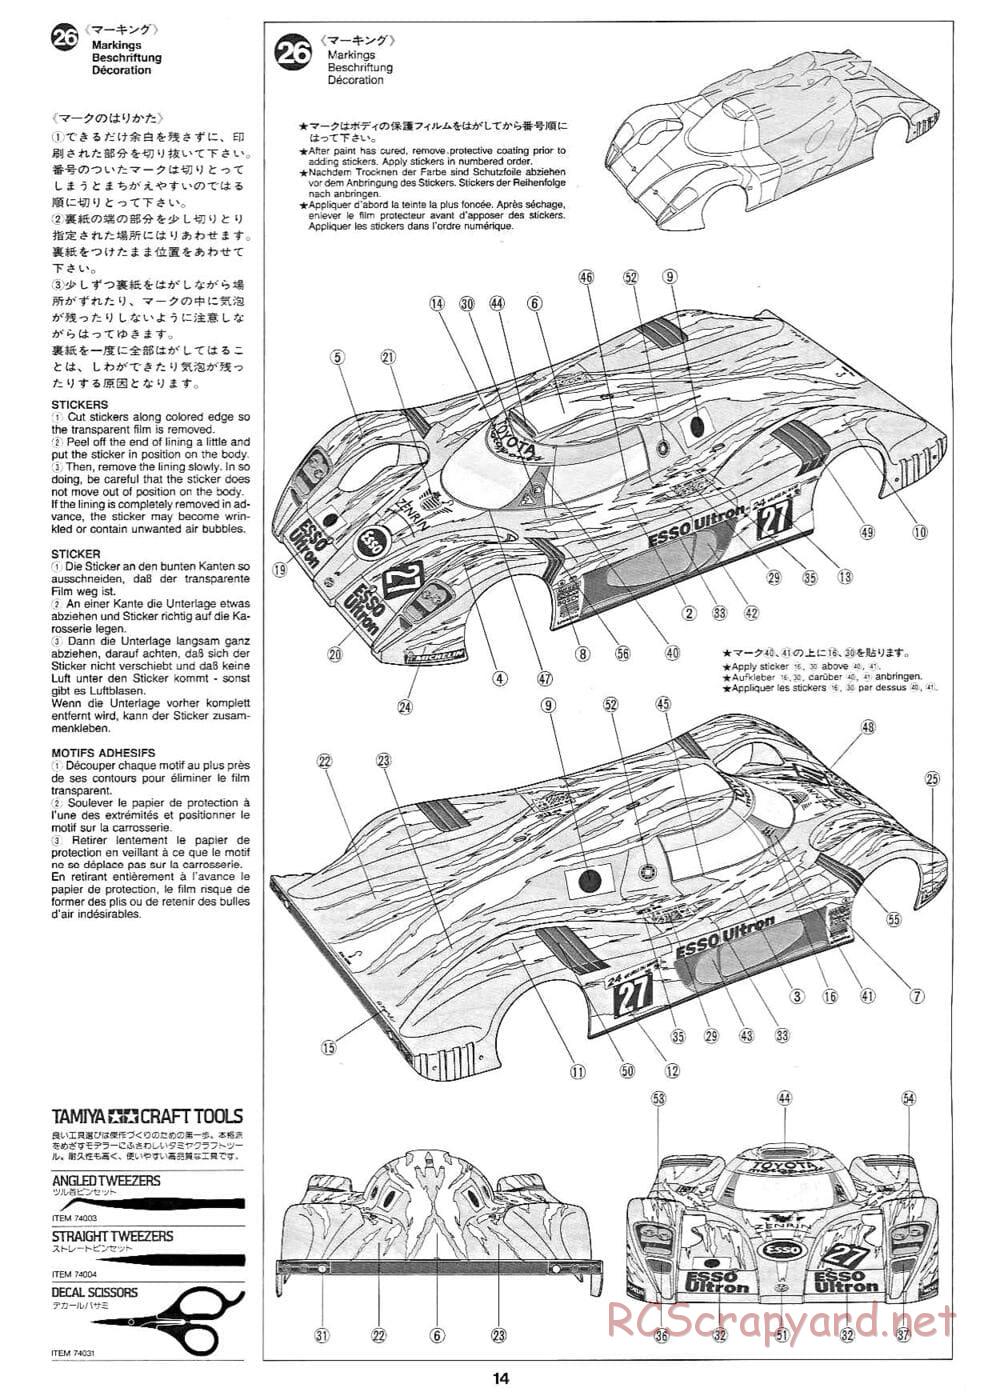 Tamiya - Toyota GT-One TS020 - F103RS Chassis - Manual - Page 14